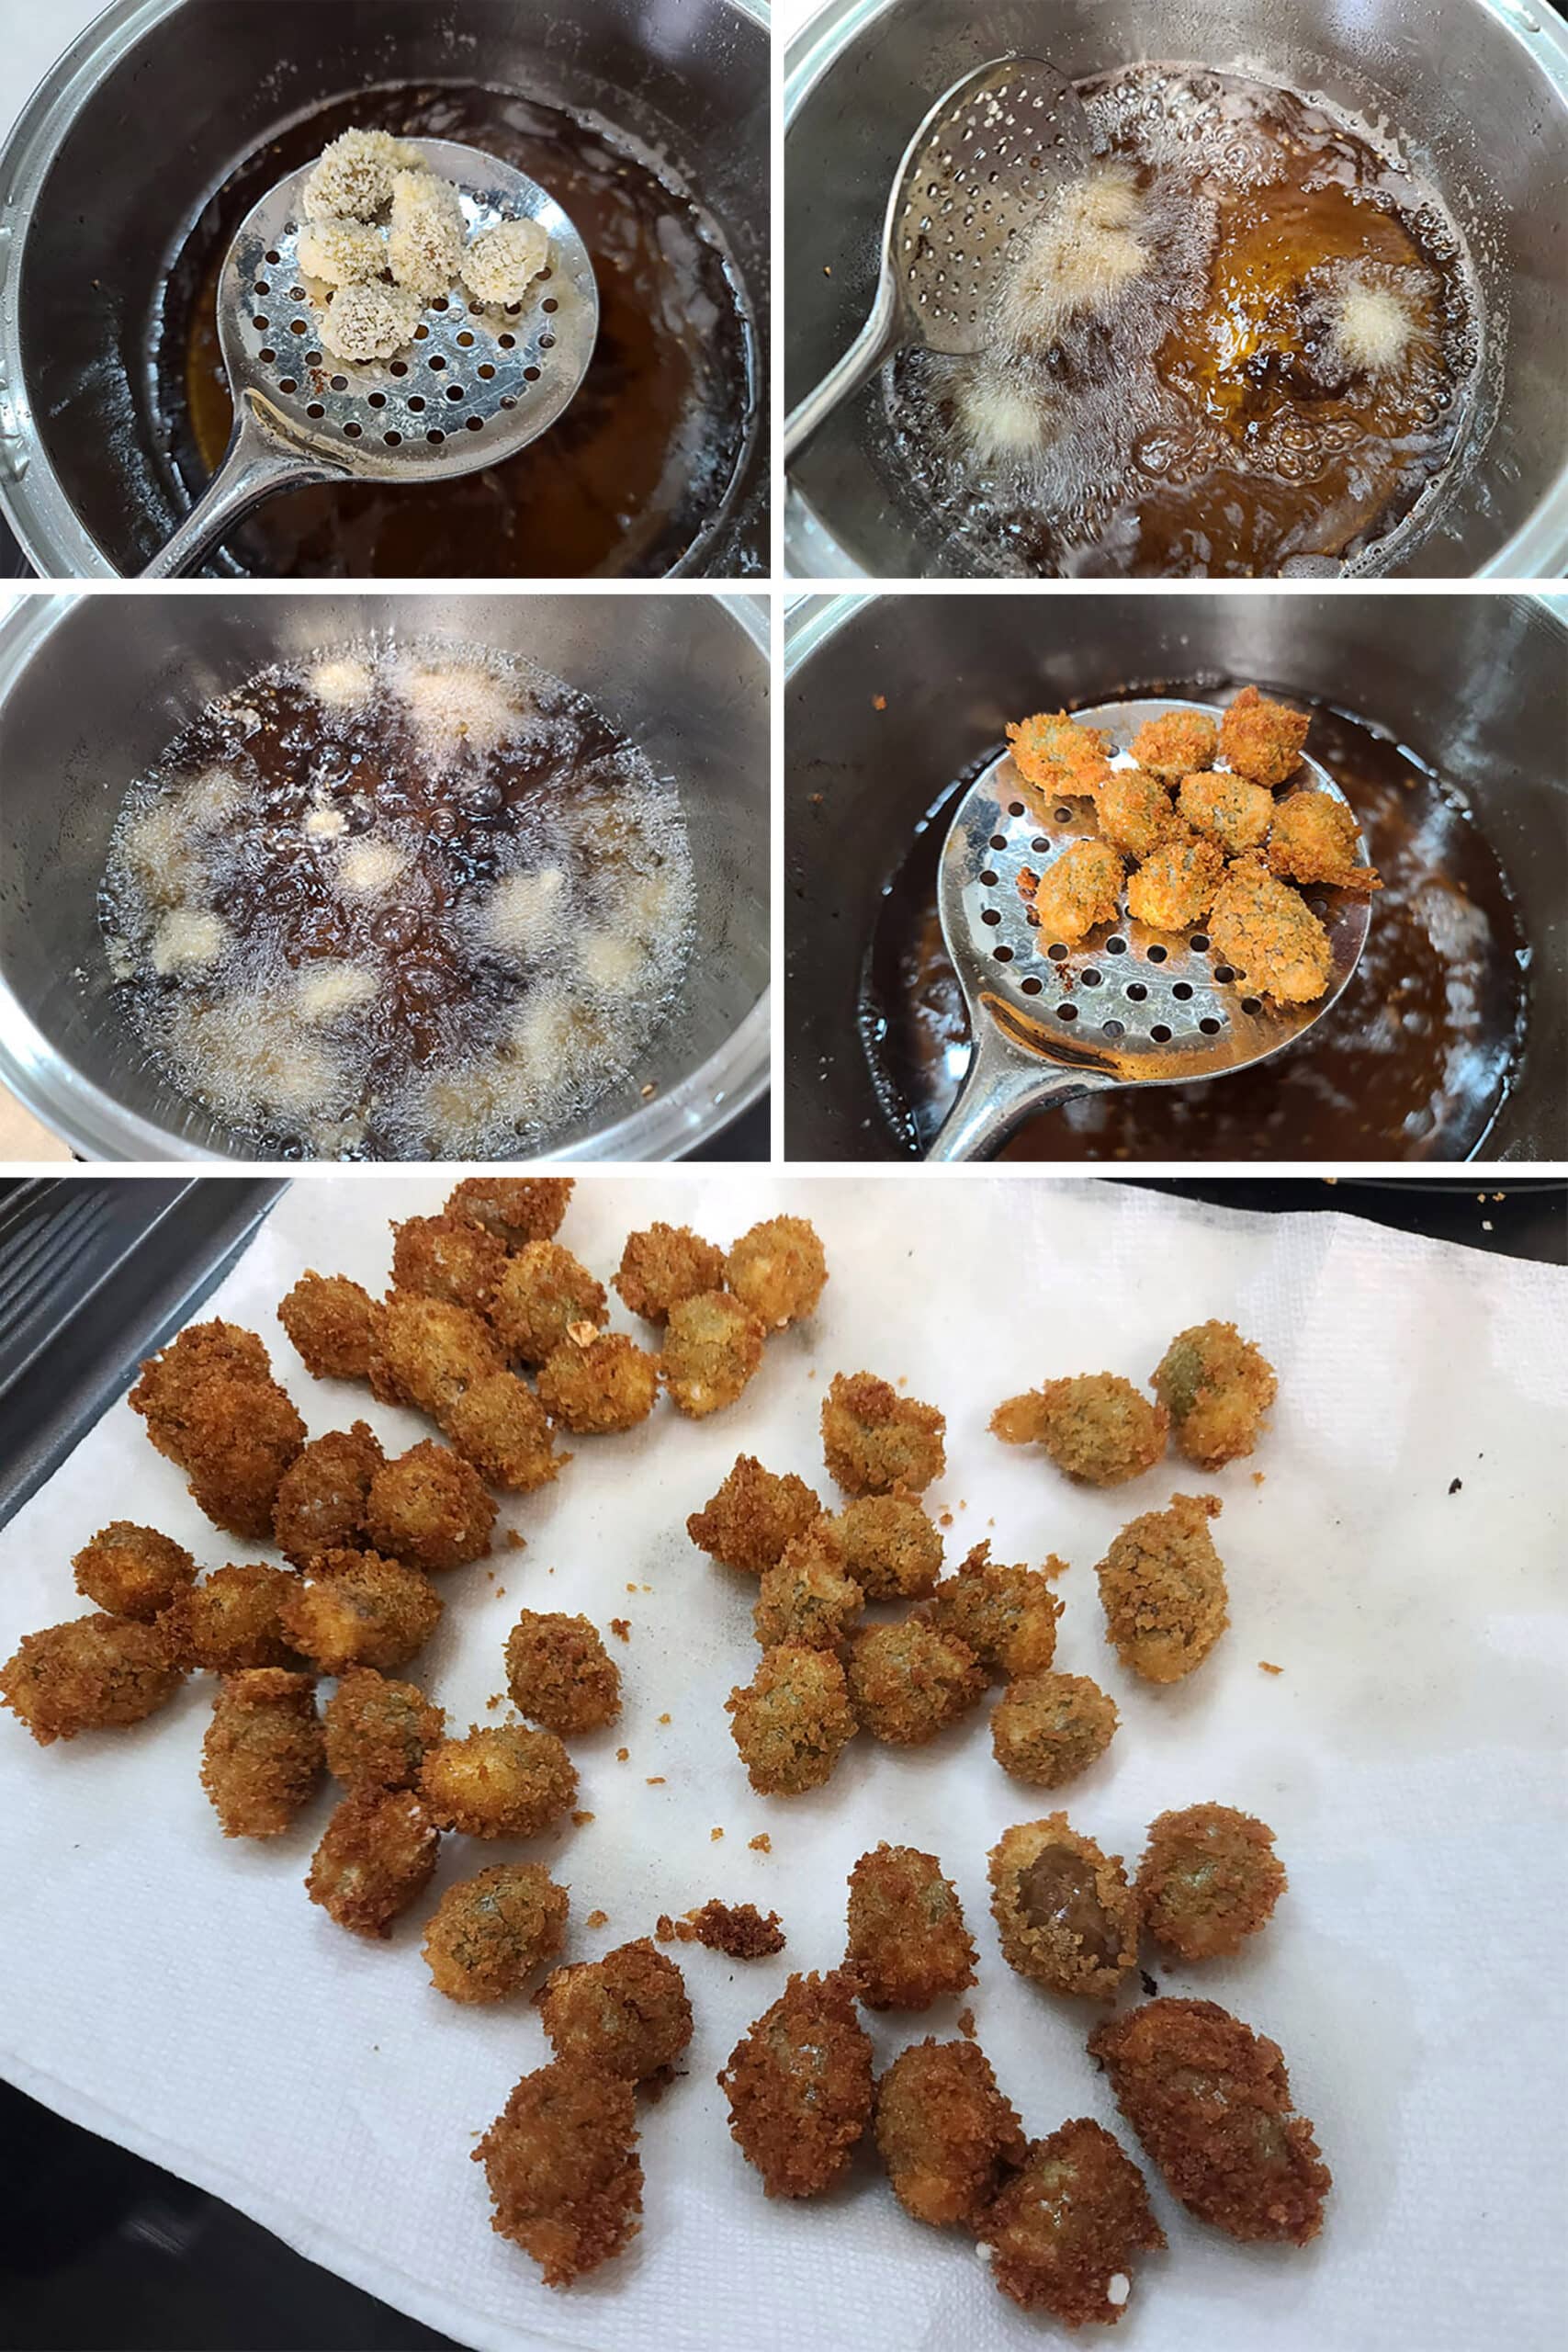 5 par image showing the breaded stuffed olives being deep fried, then drained on paper towels.